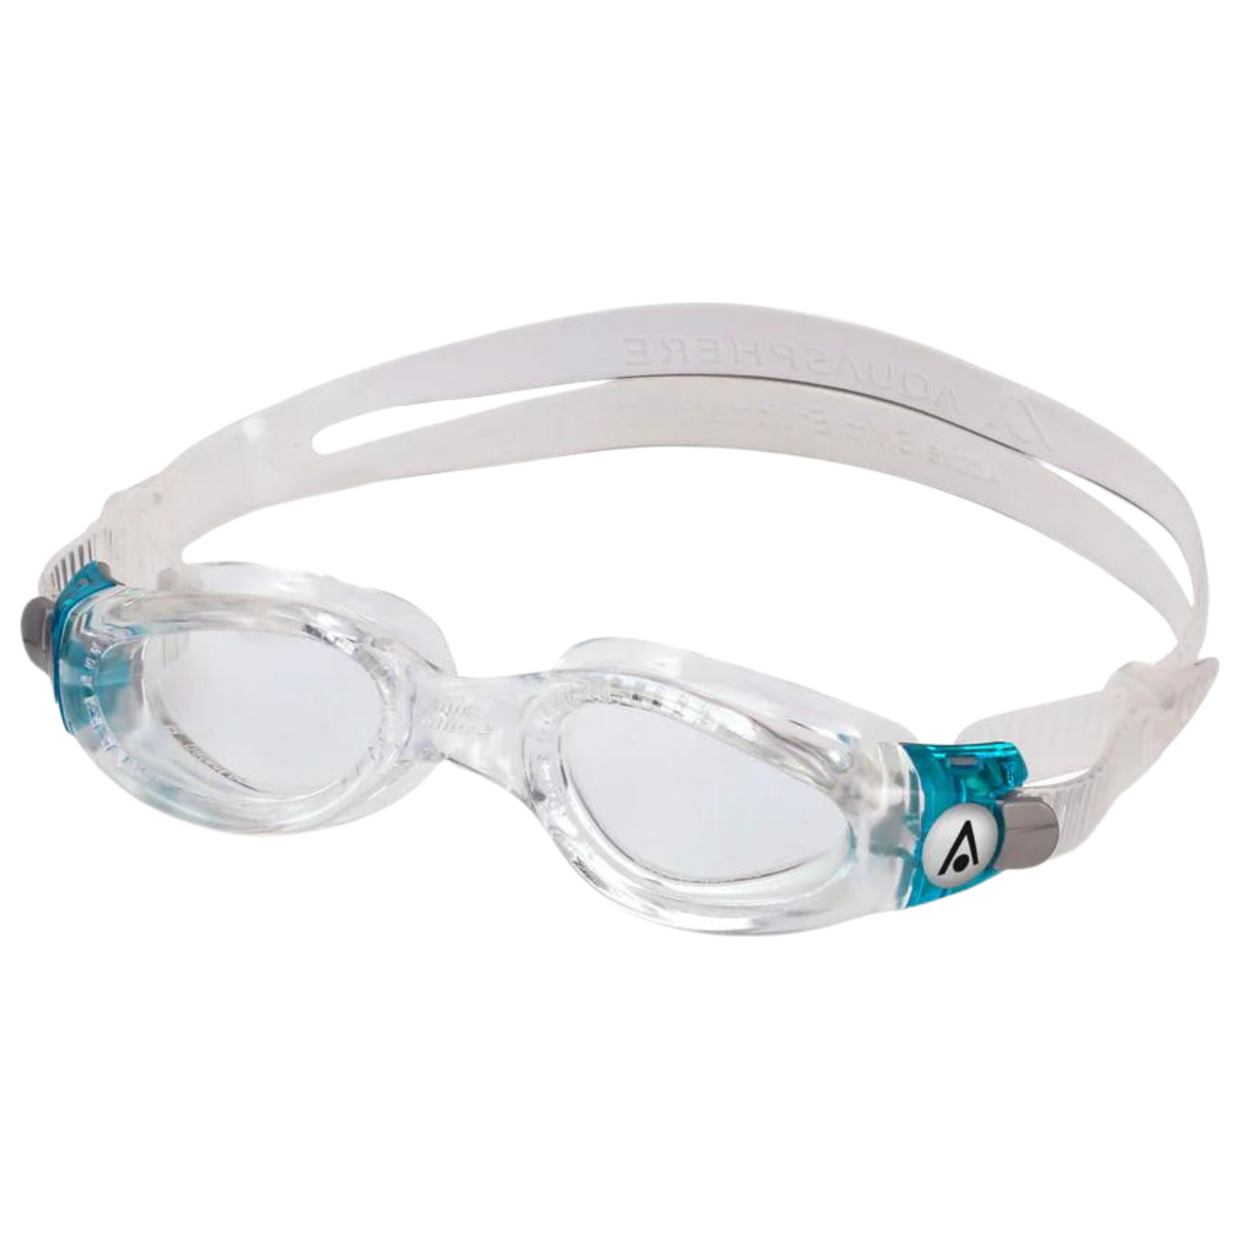 Schwimmbrille Kaiman Compact